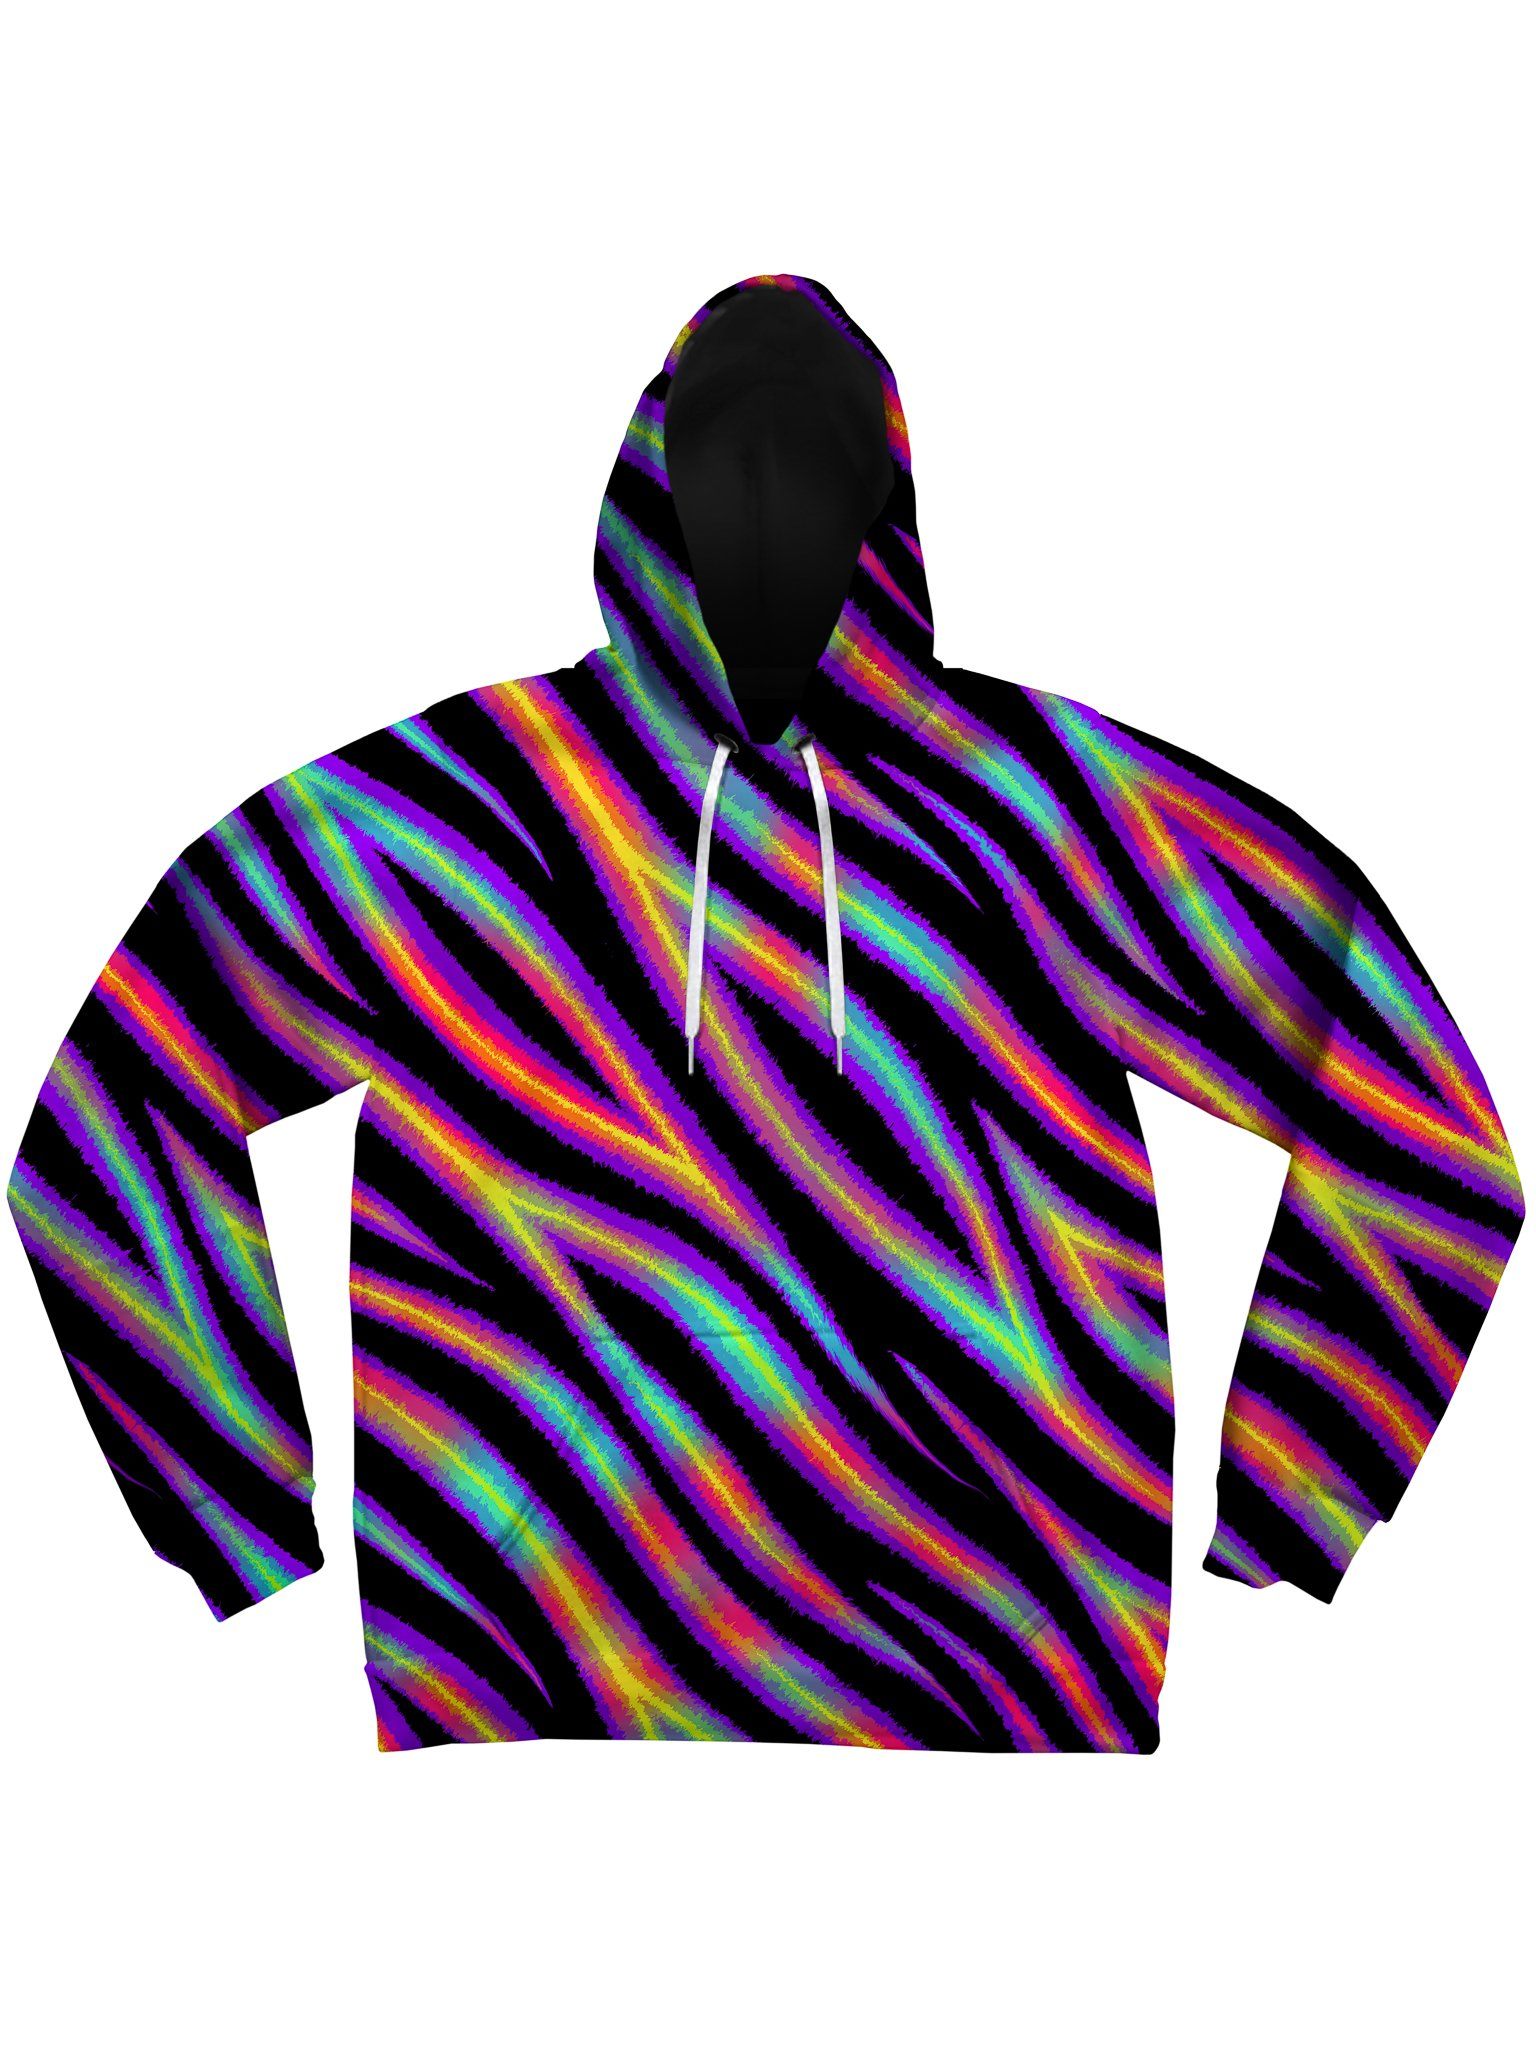 Tiger Stripes (Colorful) Unisex Hoodie Pullover Hoodies Electro Threads 